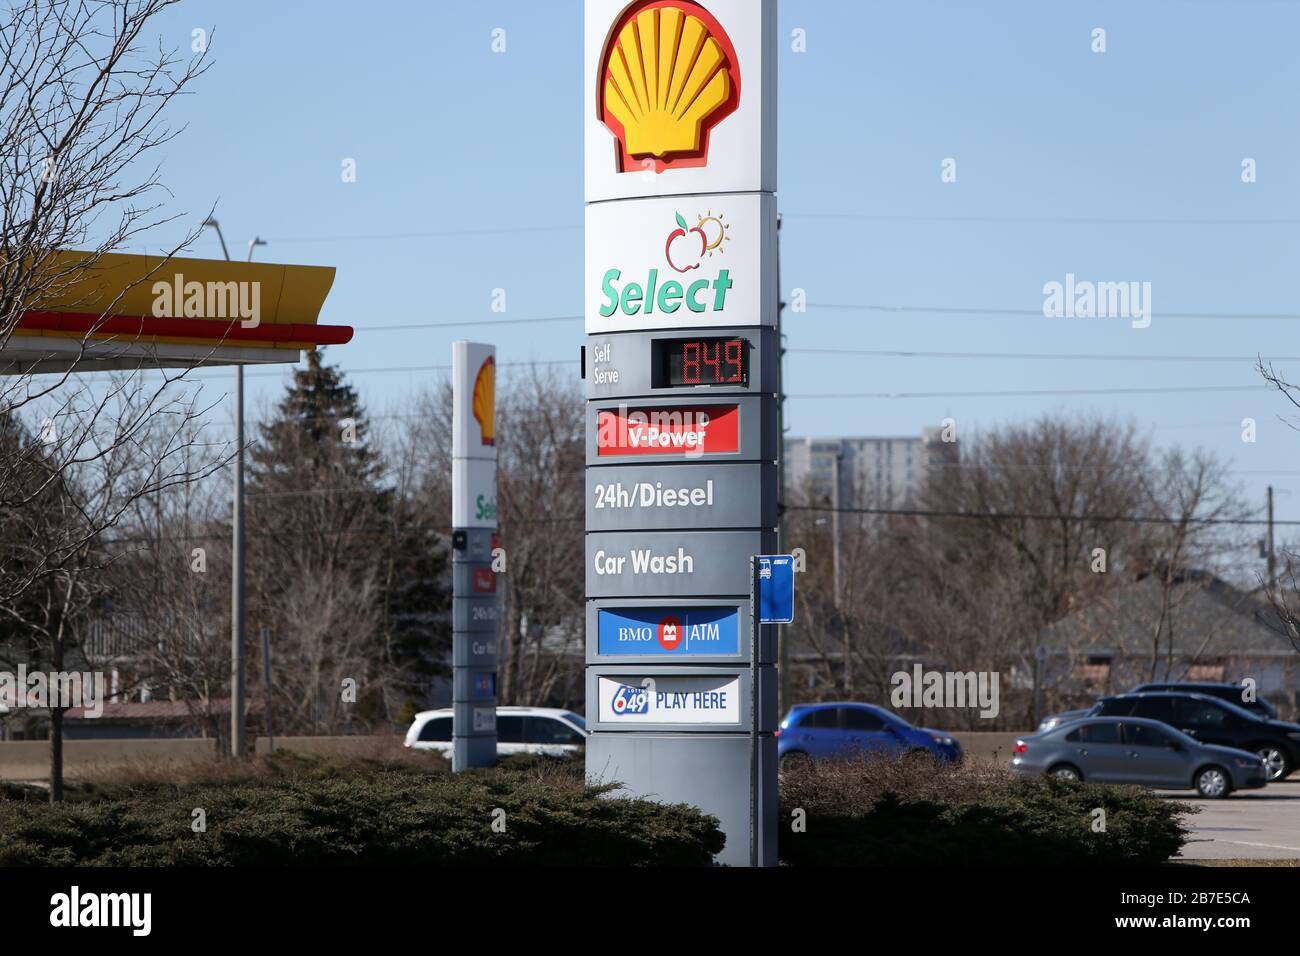 March 15th 2020, London, Ontario, Canada. Gas prices fall in Canada due to the global outbreak of the coronavirus as well as a price war between Saudi Arabia and Russia. The last time the we saw prices like this was 2009. Shell Gas Station on the corner of Highbury and Hamilton Rd in London Ontario at 84.9 Cents per Litre.  Luke Durda/Alamy Stock Photo